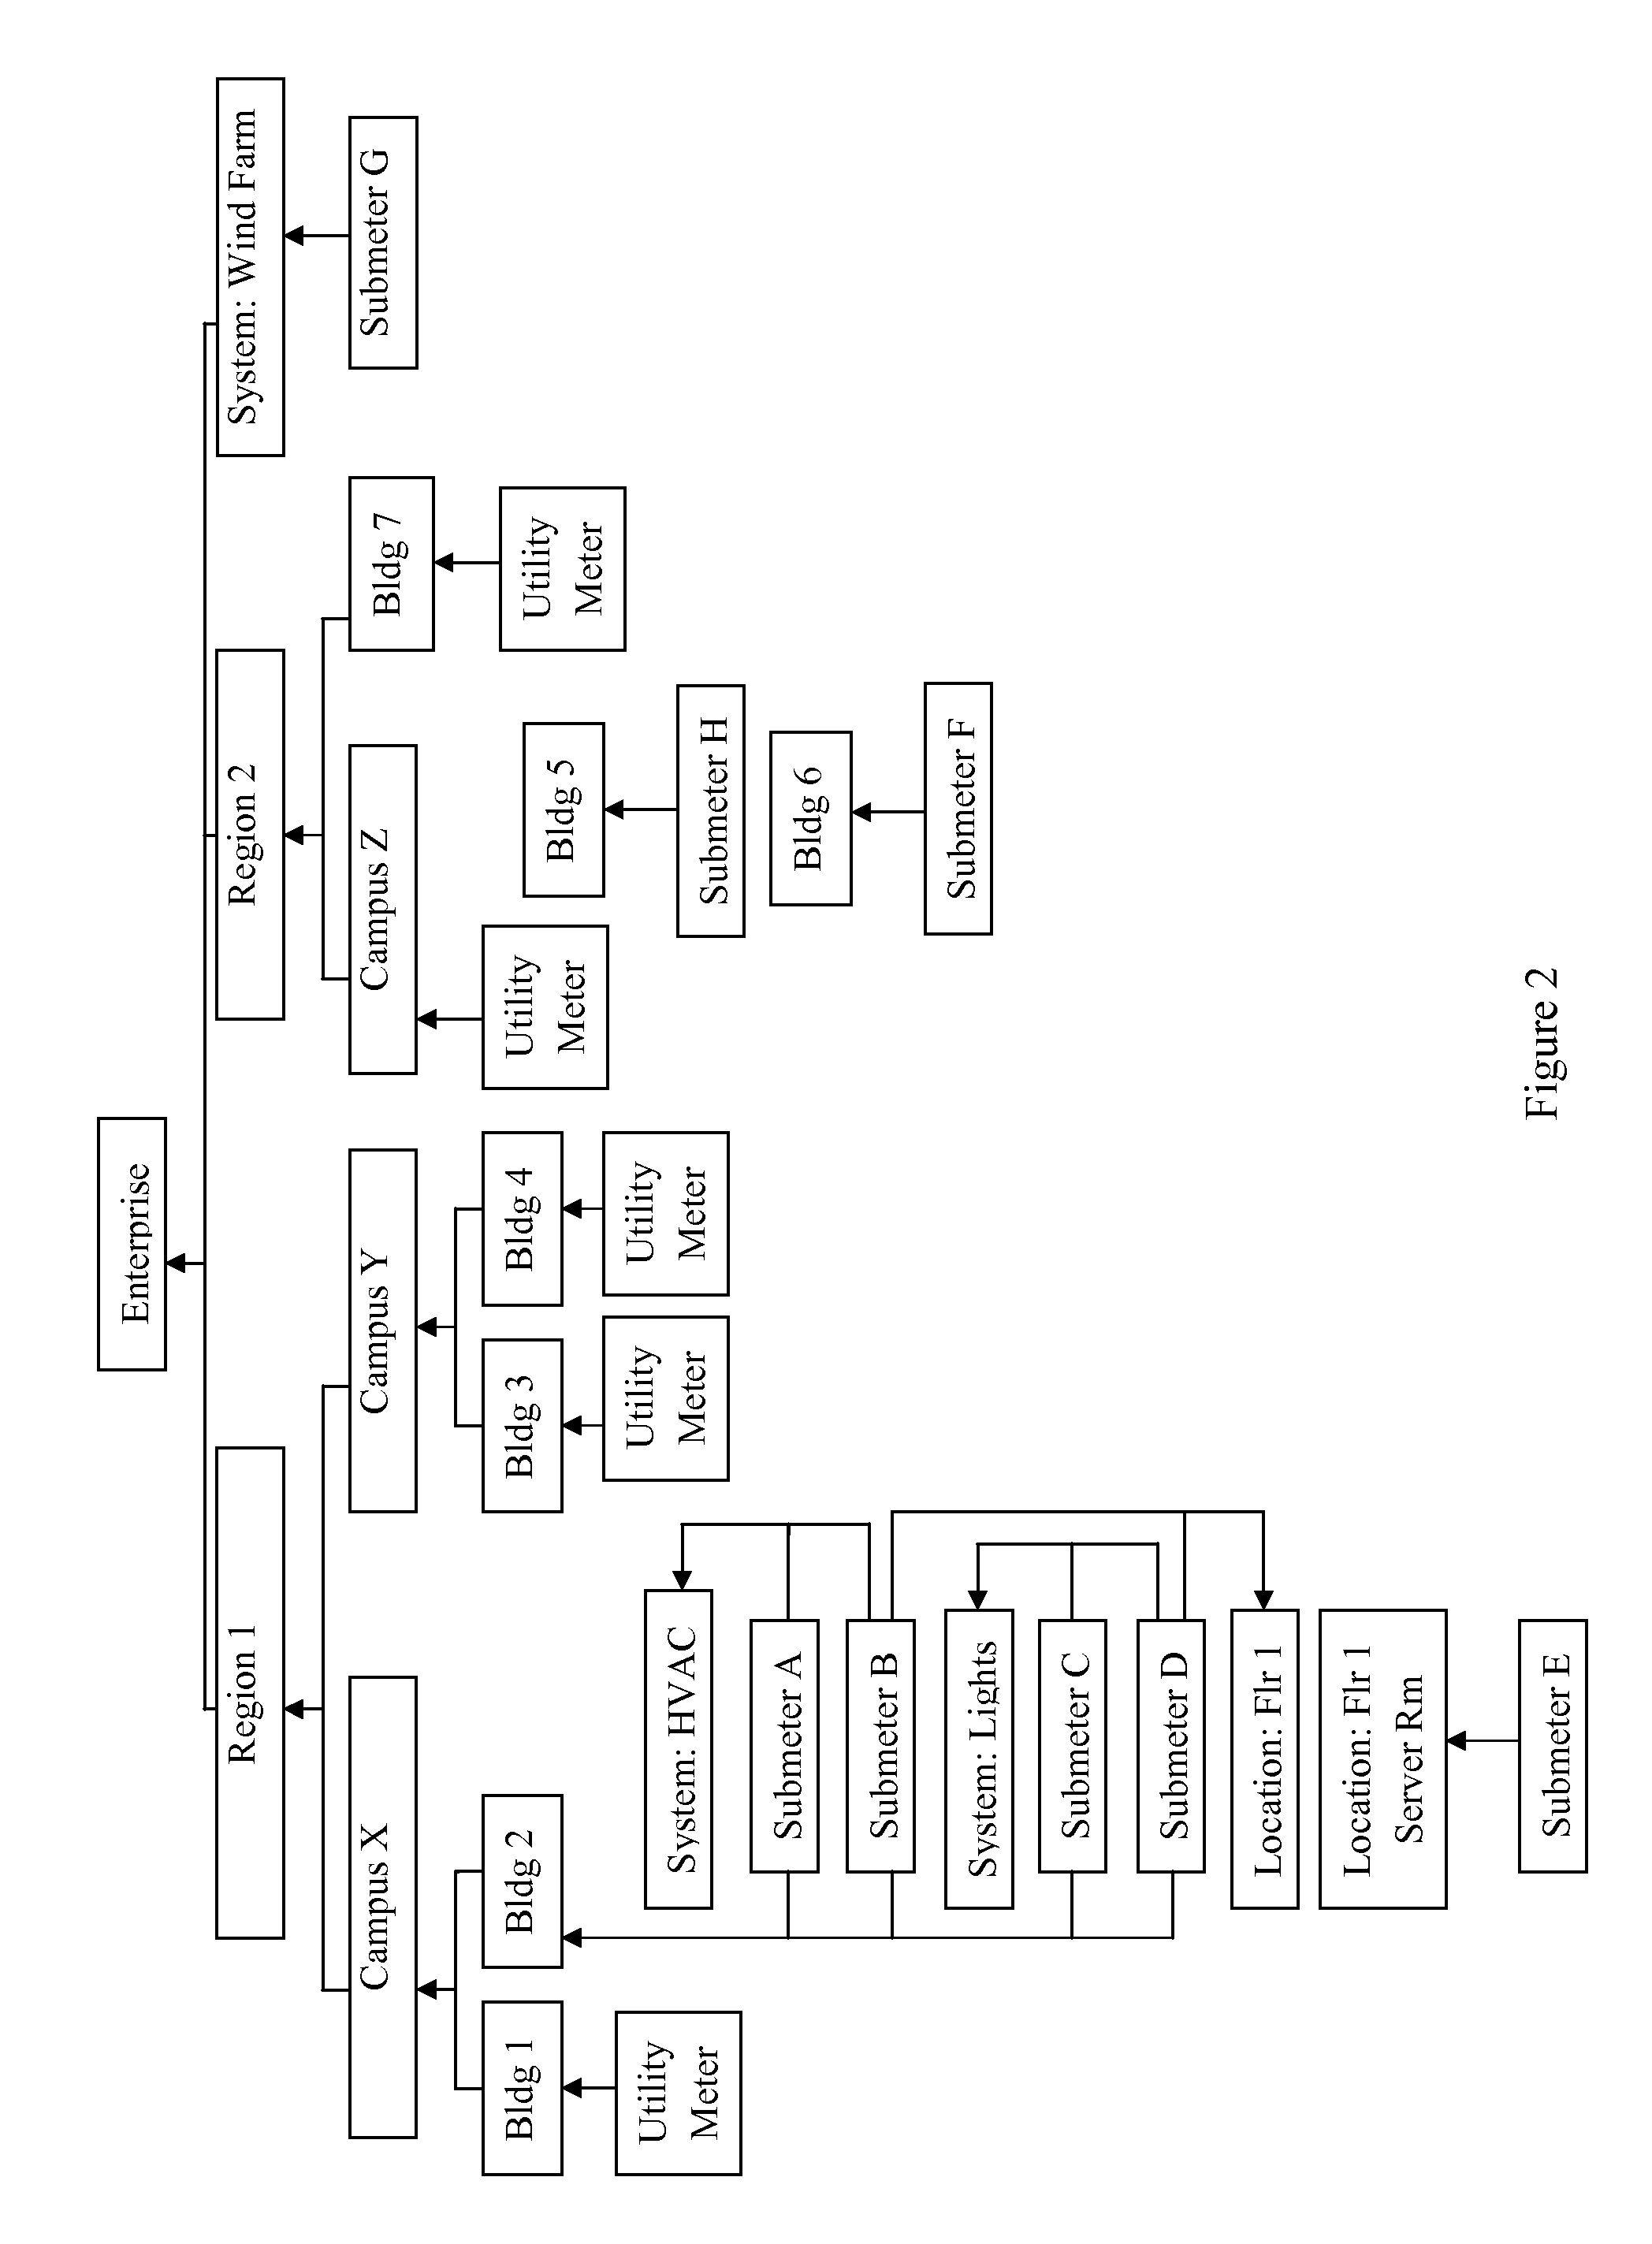 System and methods for real-time detection, correction, and transformation of time series data